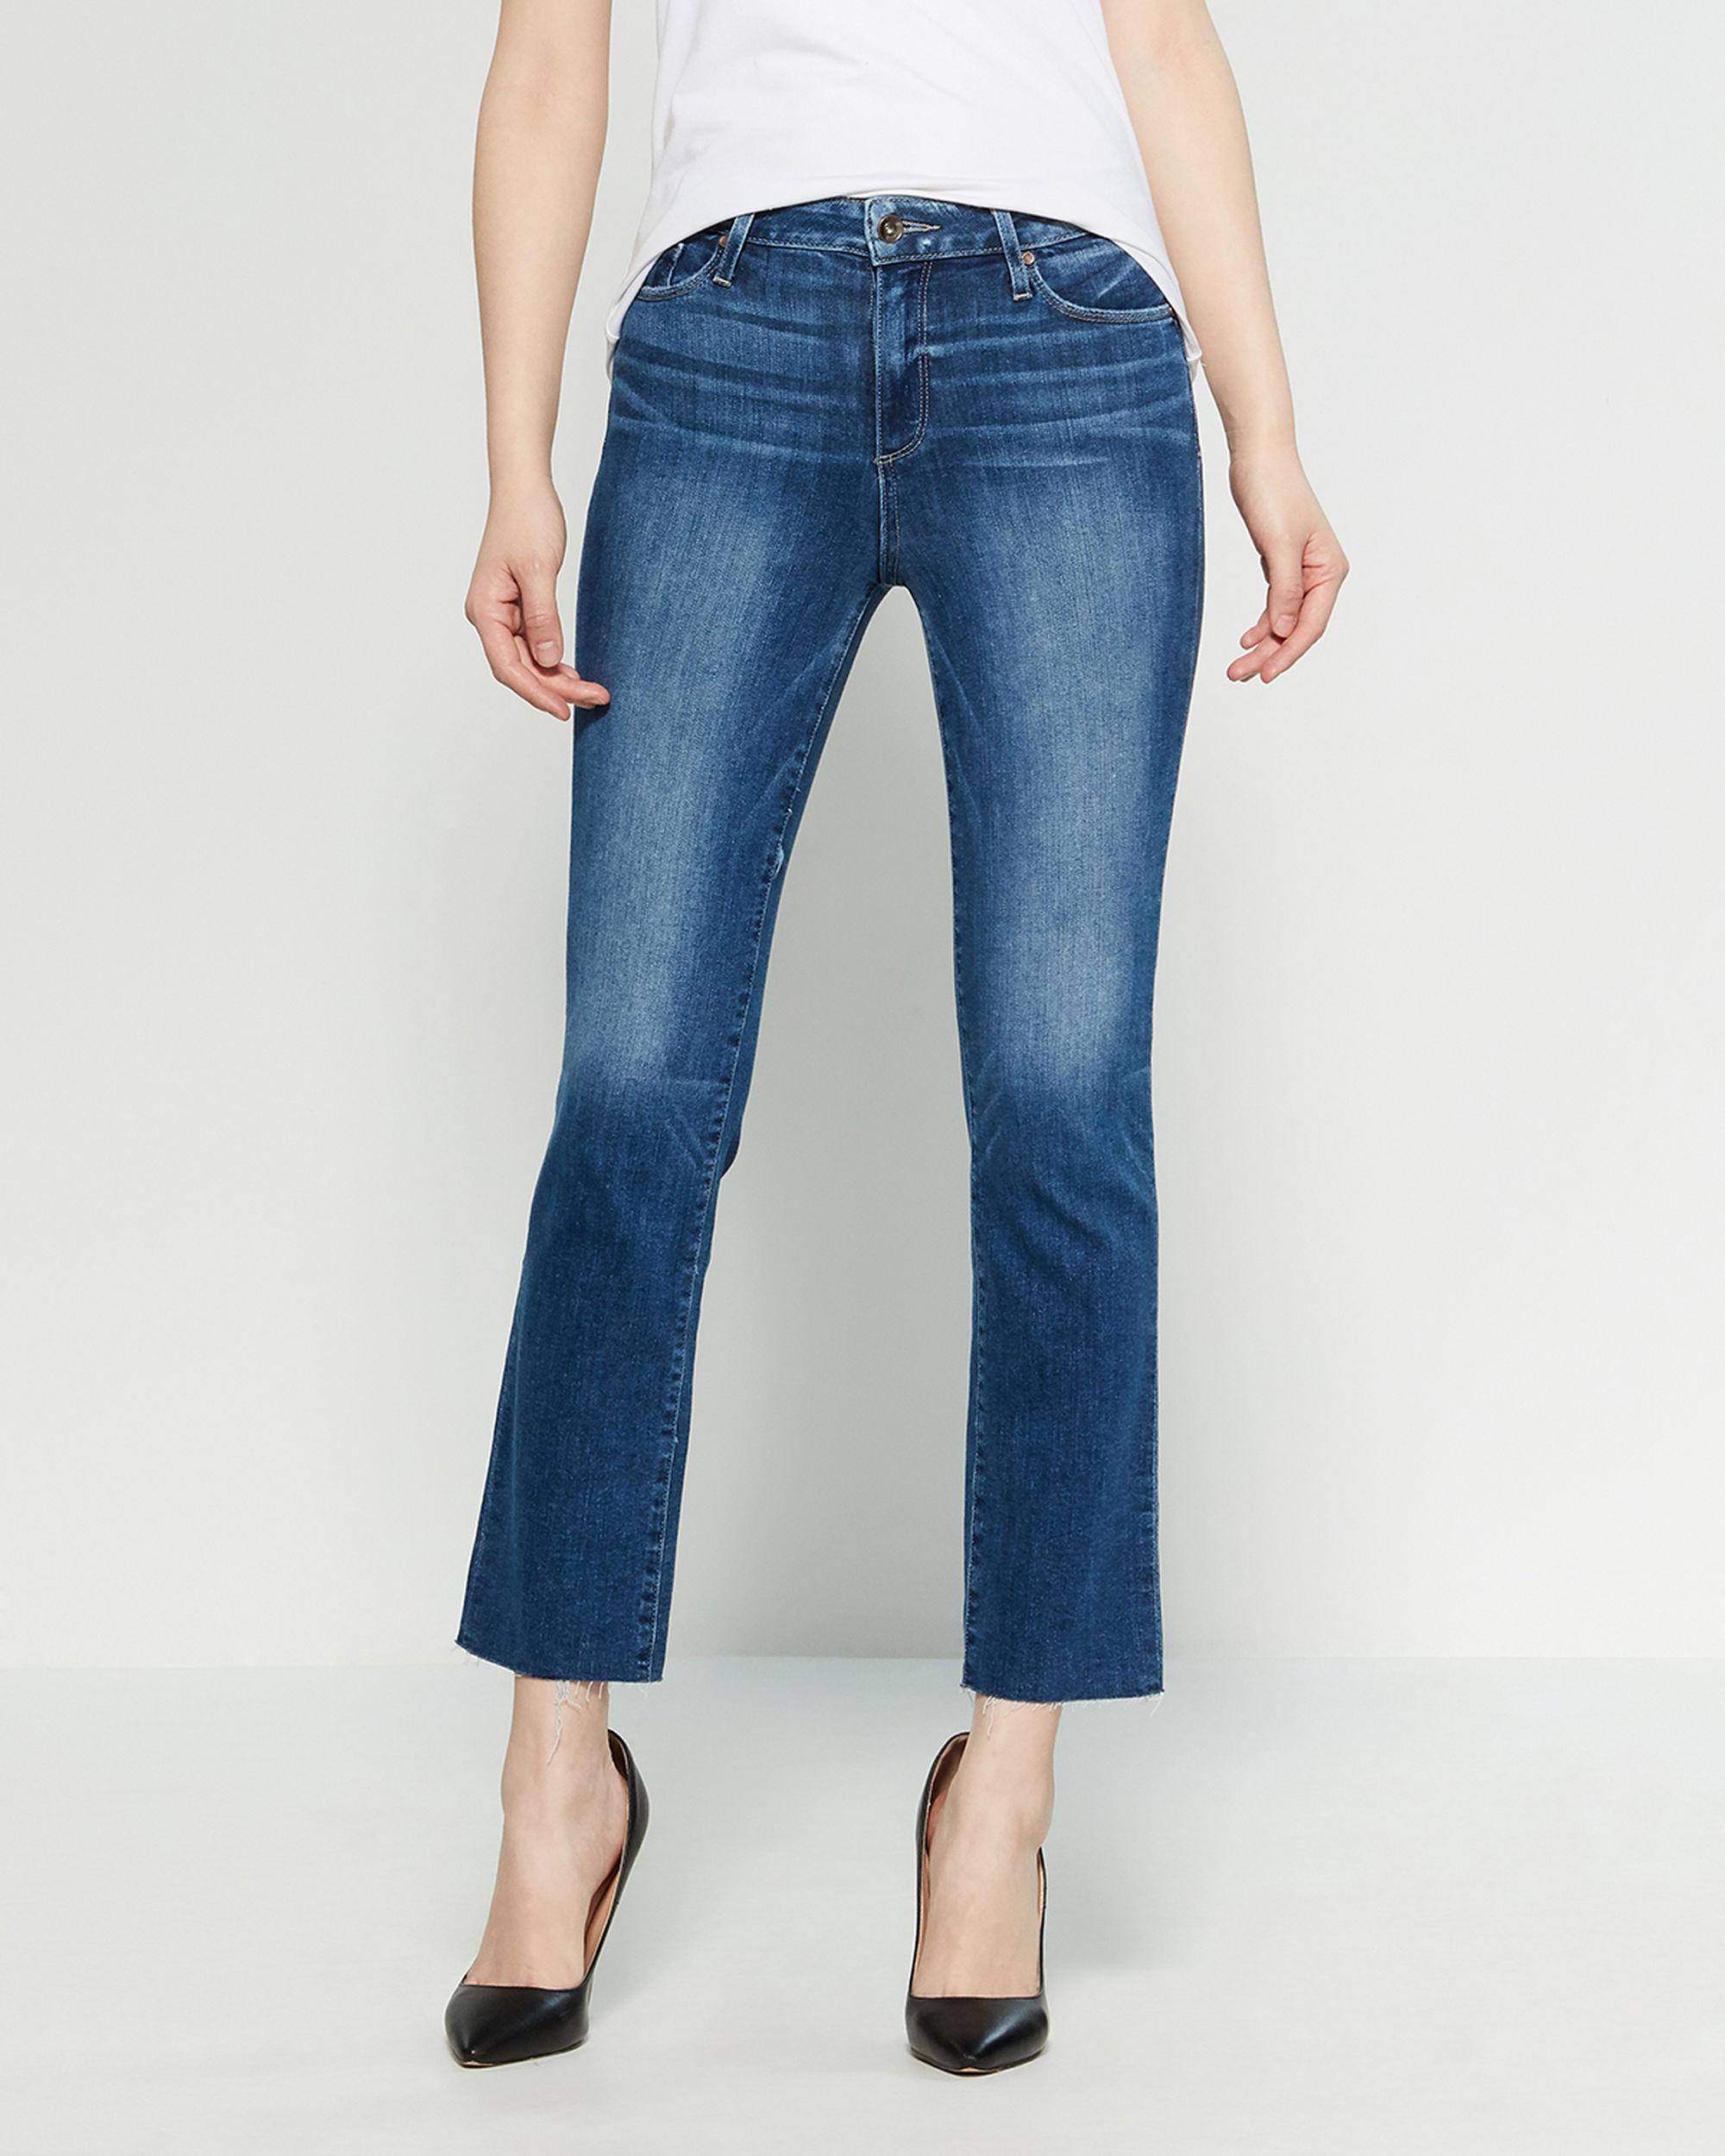 Lyst - PAIGE Hoxton High-rise Straight Ankle Jeans in Blue